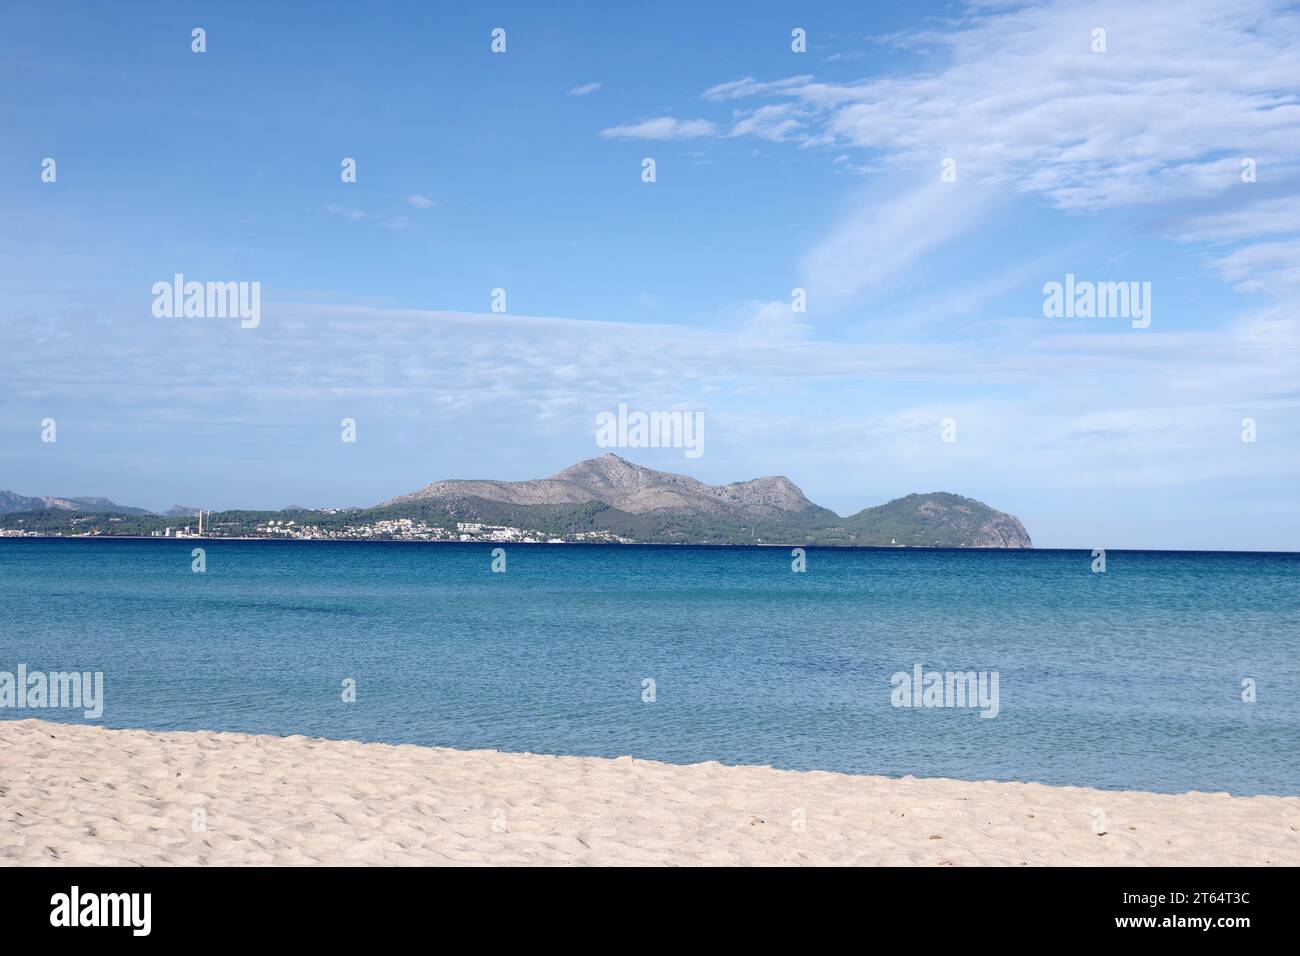 Beach, sea, landscape, blue, deserted, holiday area, Playa de Muro, Majorca, view from the sandy beach to the Mediterranean Sea and the sky with few Stock Photo